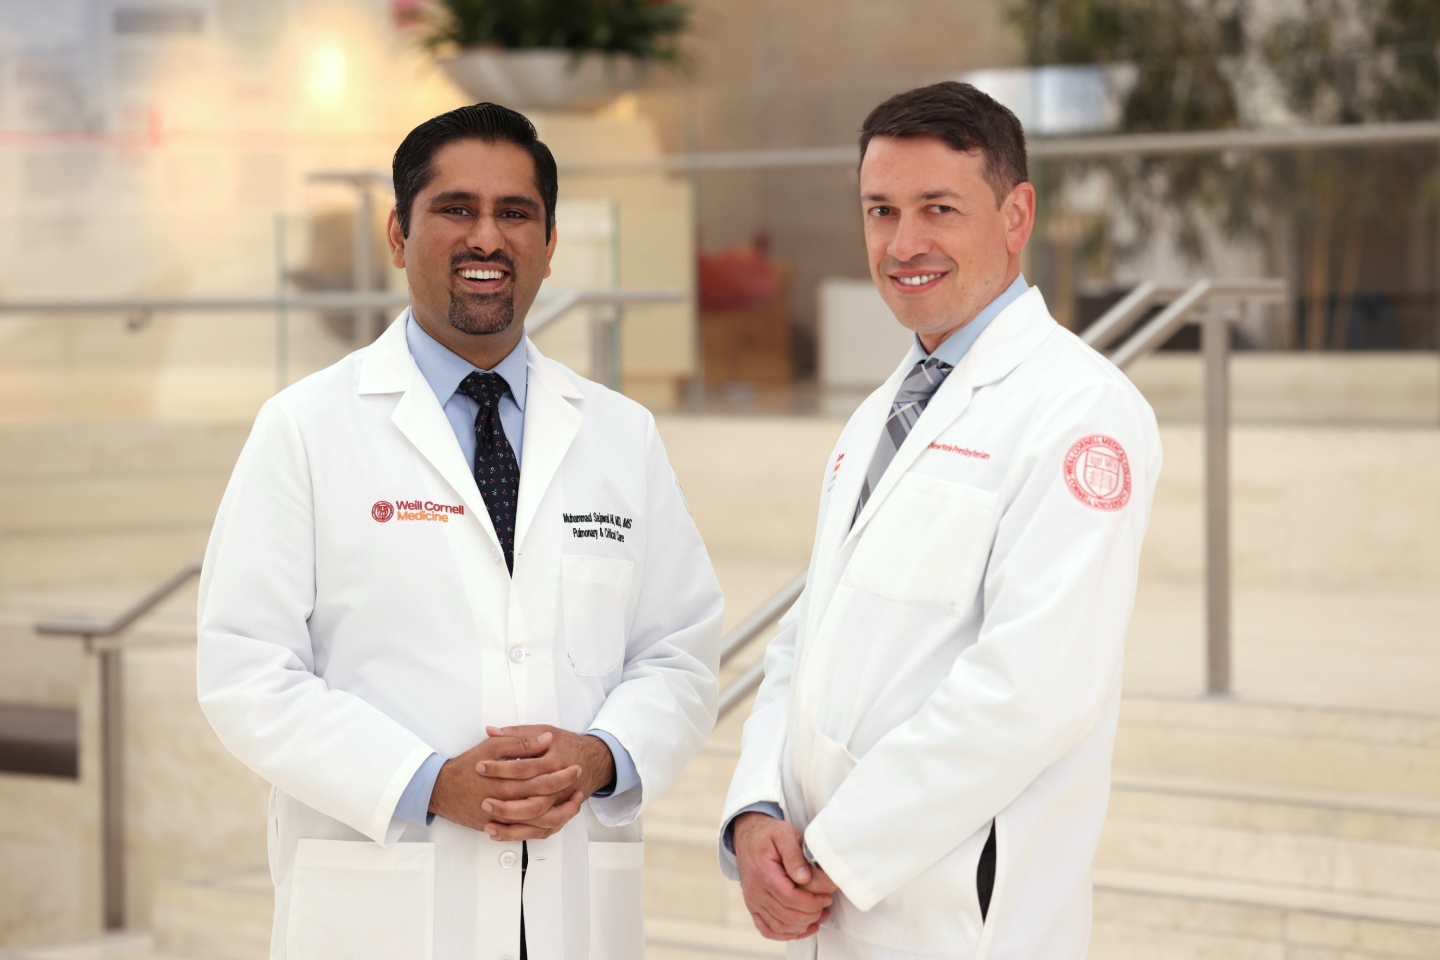 Drs. Ali and Shostak